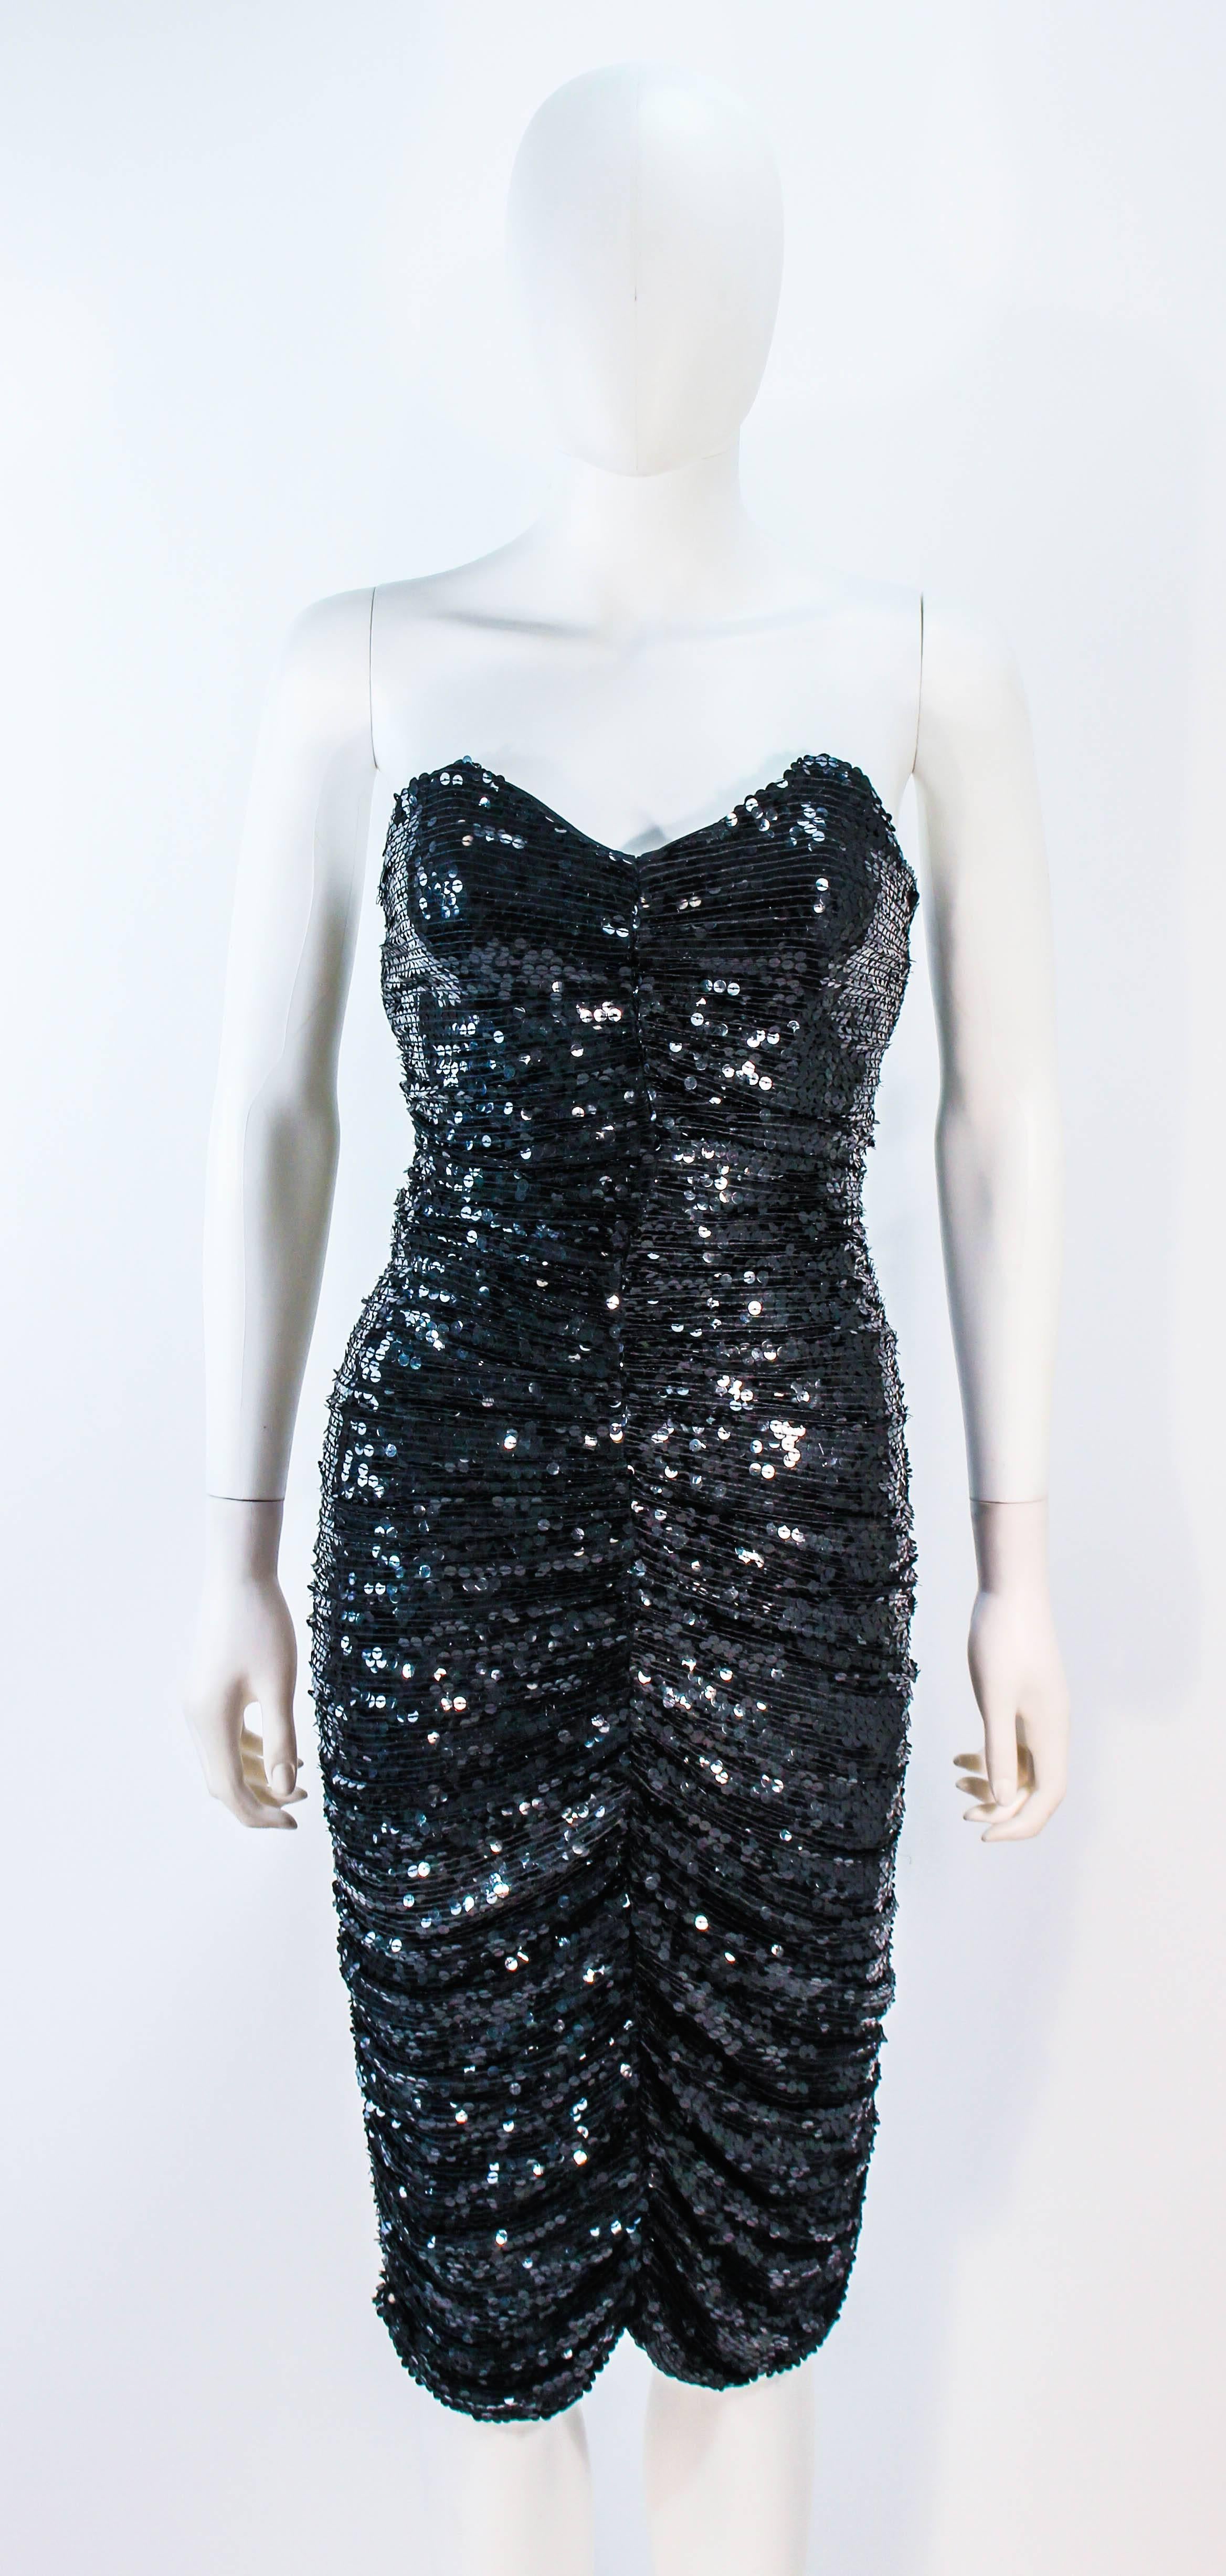 KOZO Vintage Black Silk Sequin Ruched Cocktail Dress Size XS In Excellent Condition For Sale In Los Angeles, CA